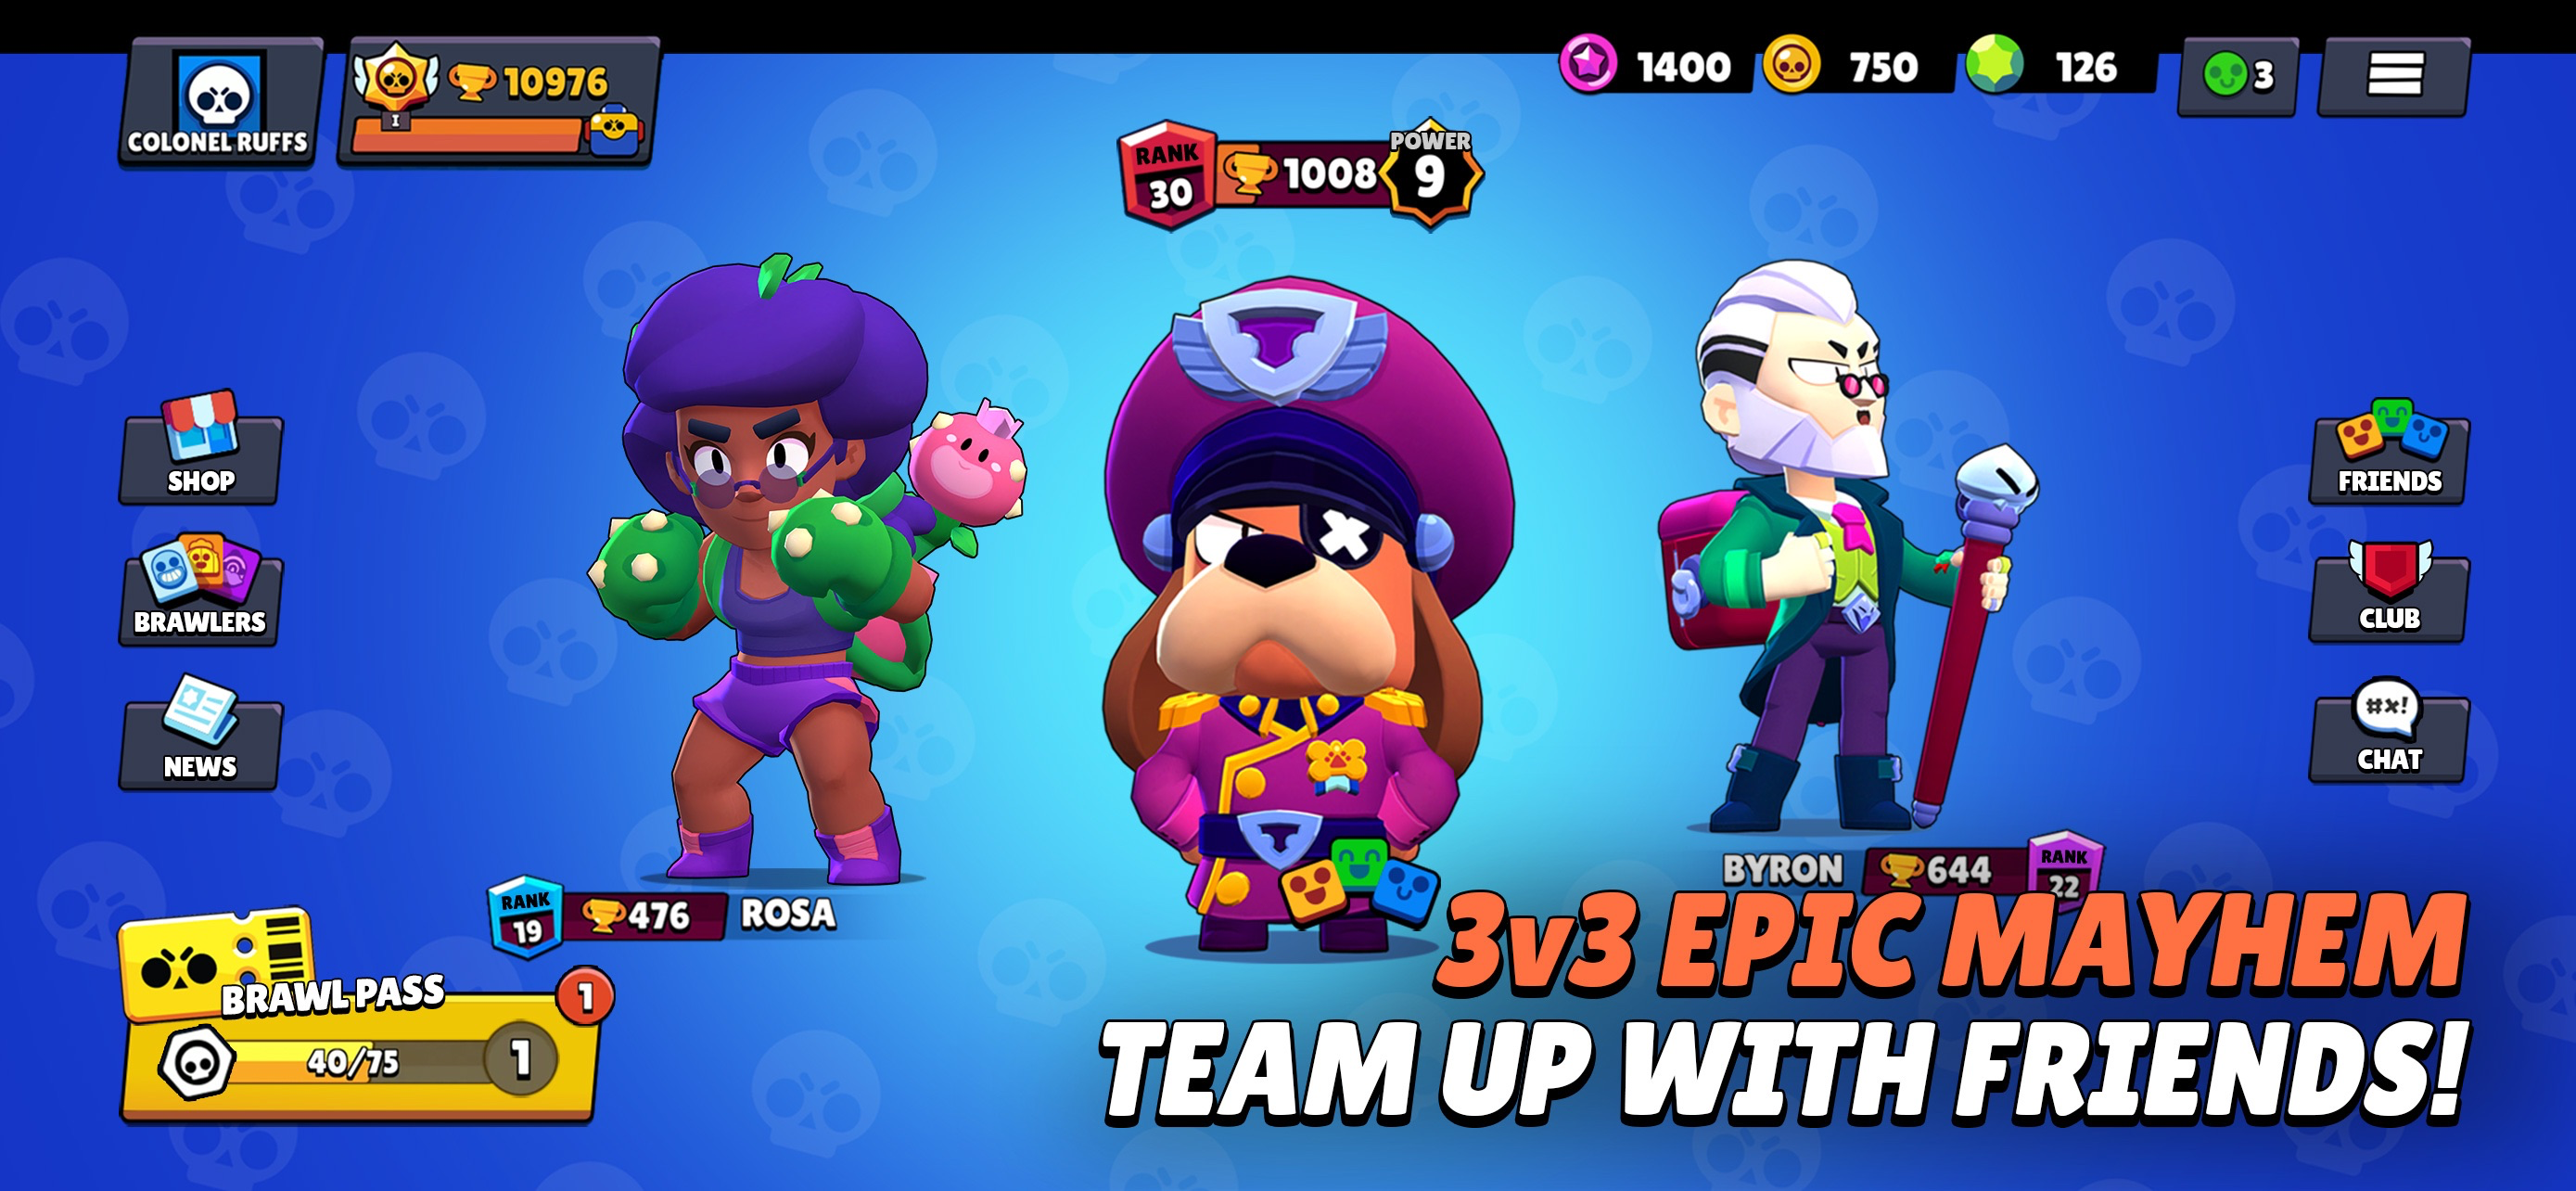 Brawl Stars Overview Apple App Store Us - all ive done is loose trophies brawl stars